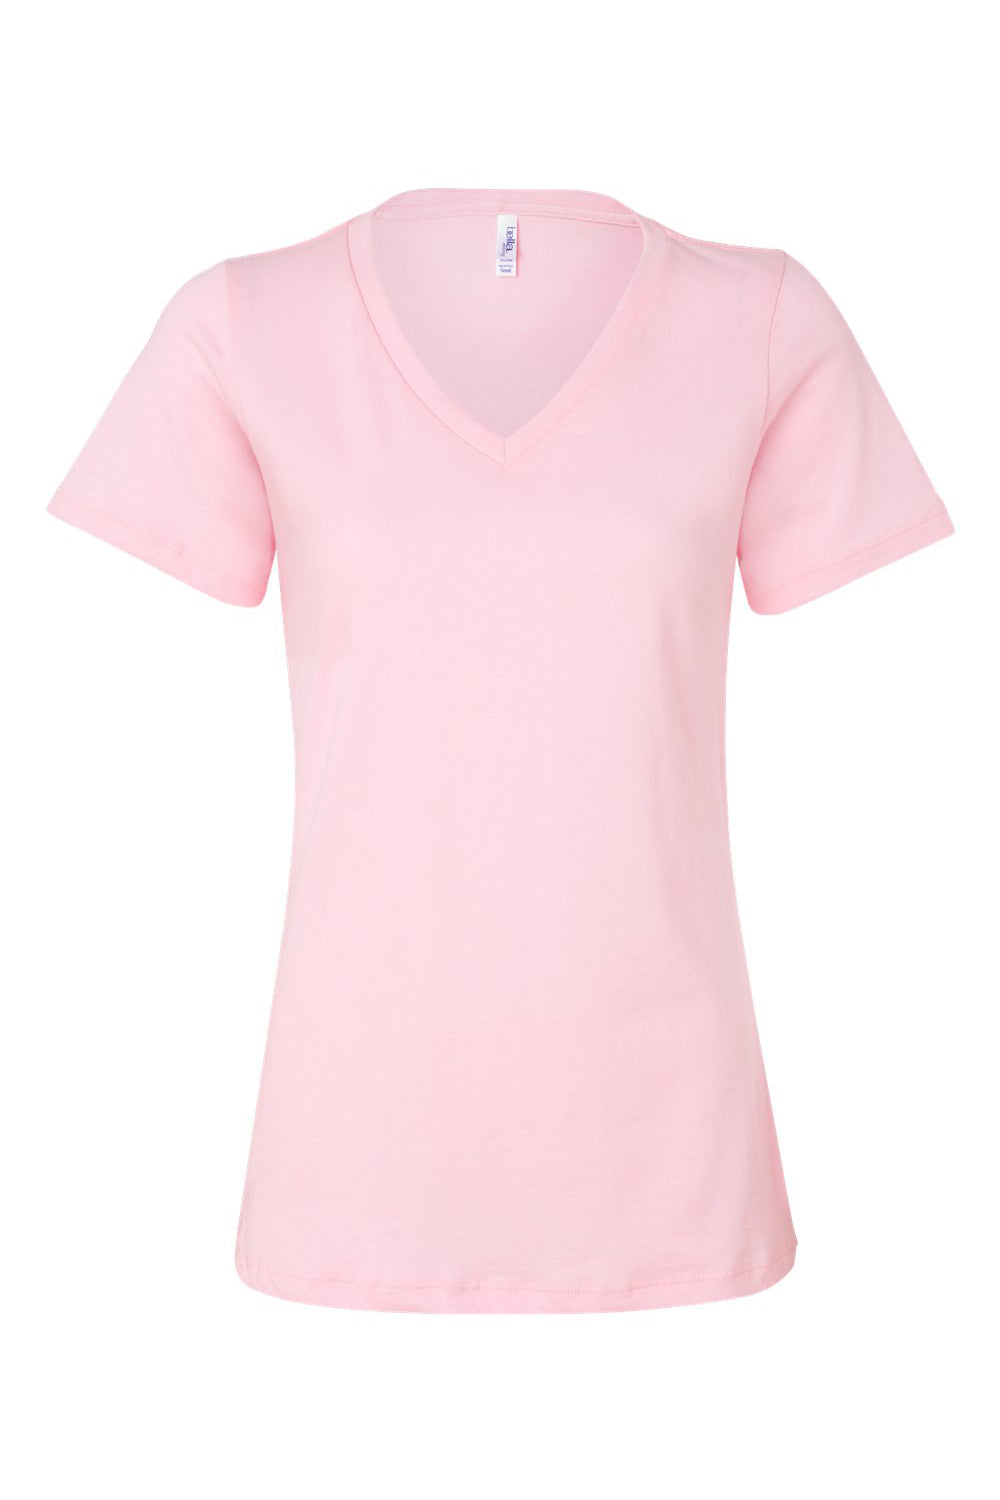 Bella + Canvas BC6405/6405 Womens Relaxed Jersey Short Sleeve V-Neck T-Shirt Pink Flat Front